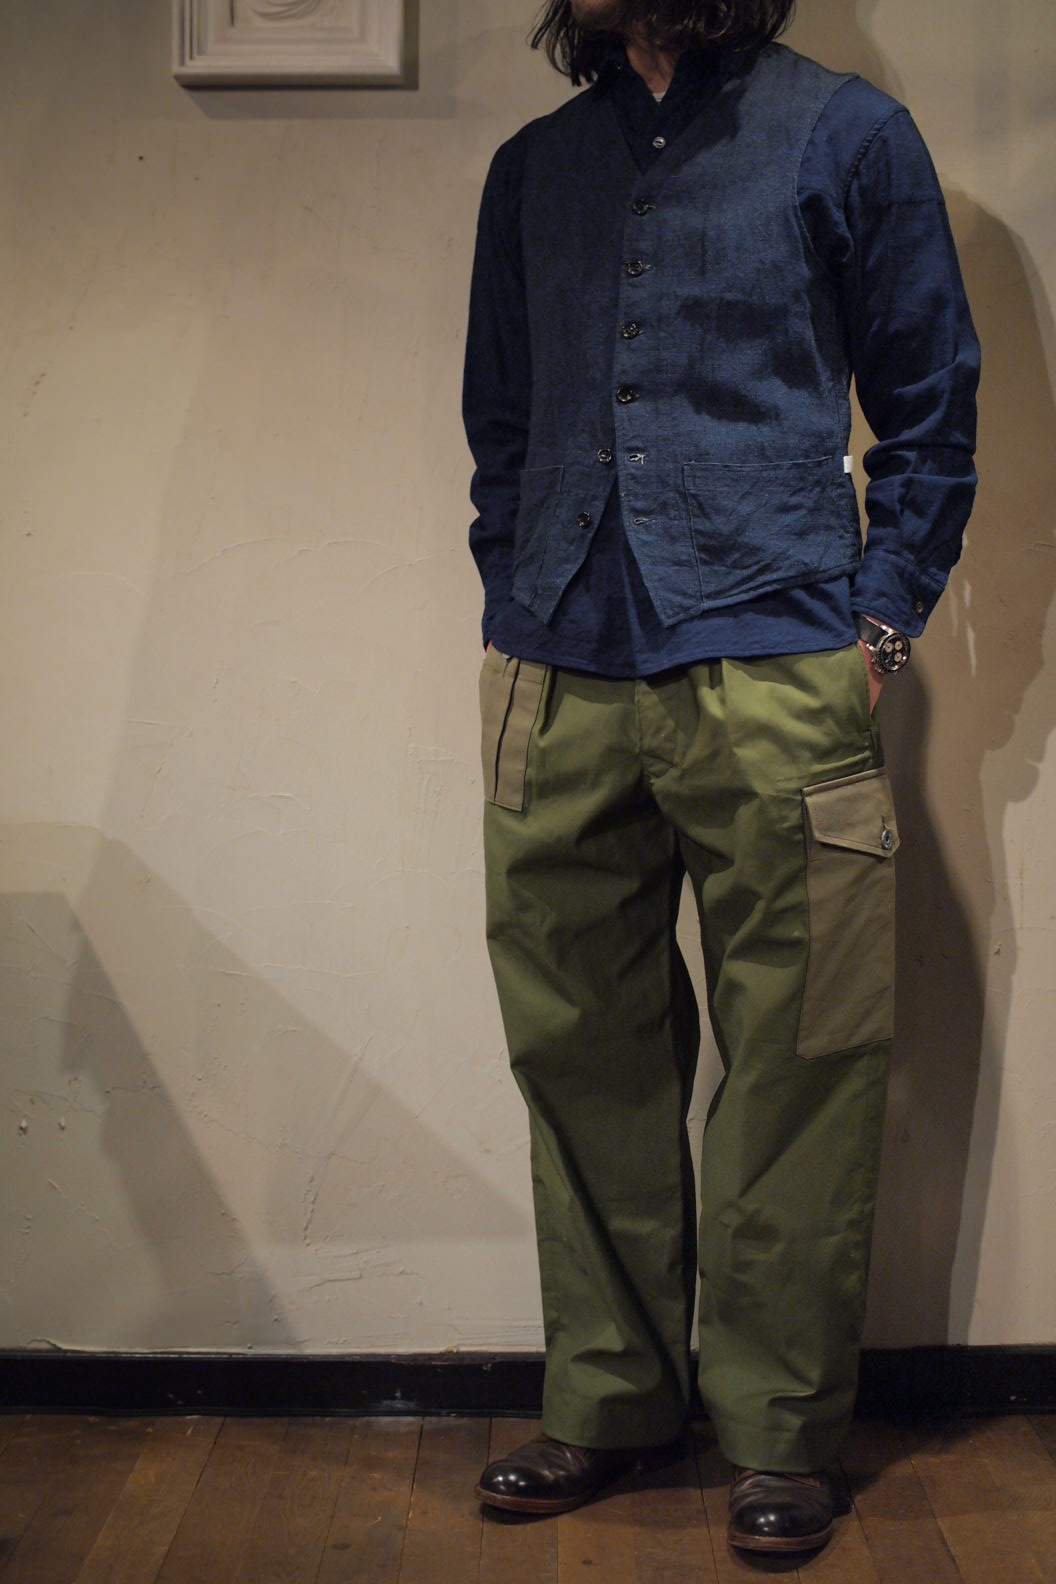 ARMY BUCKLE PANT Nigel Cabourn 36